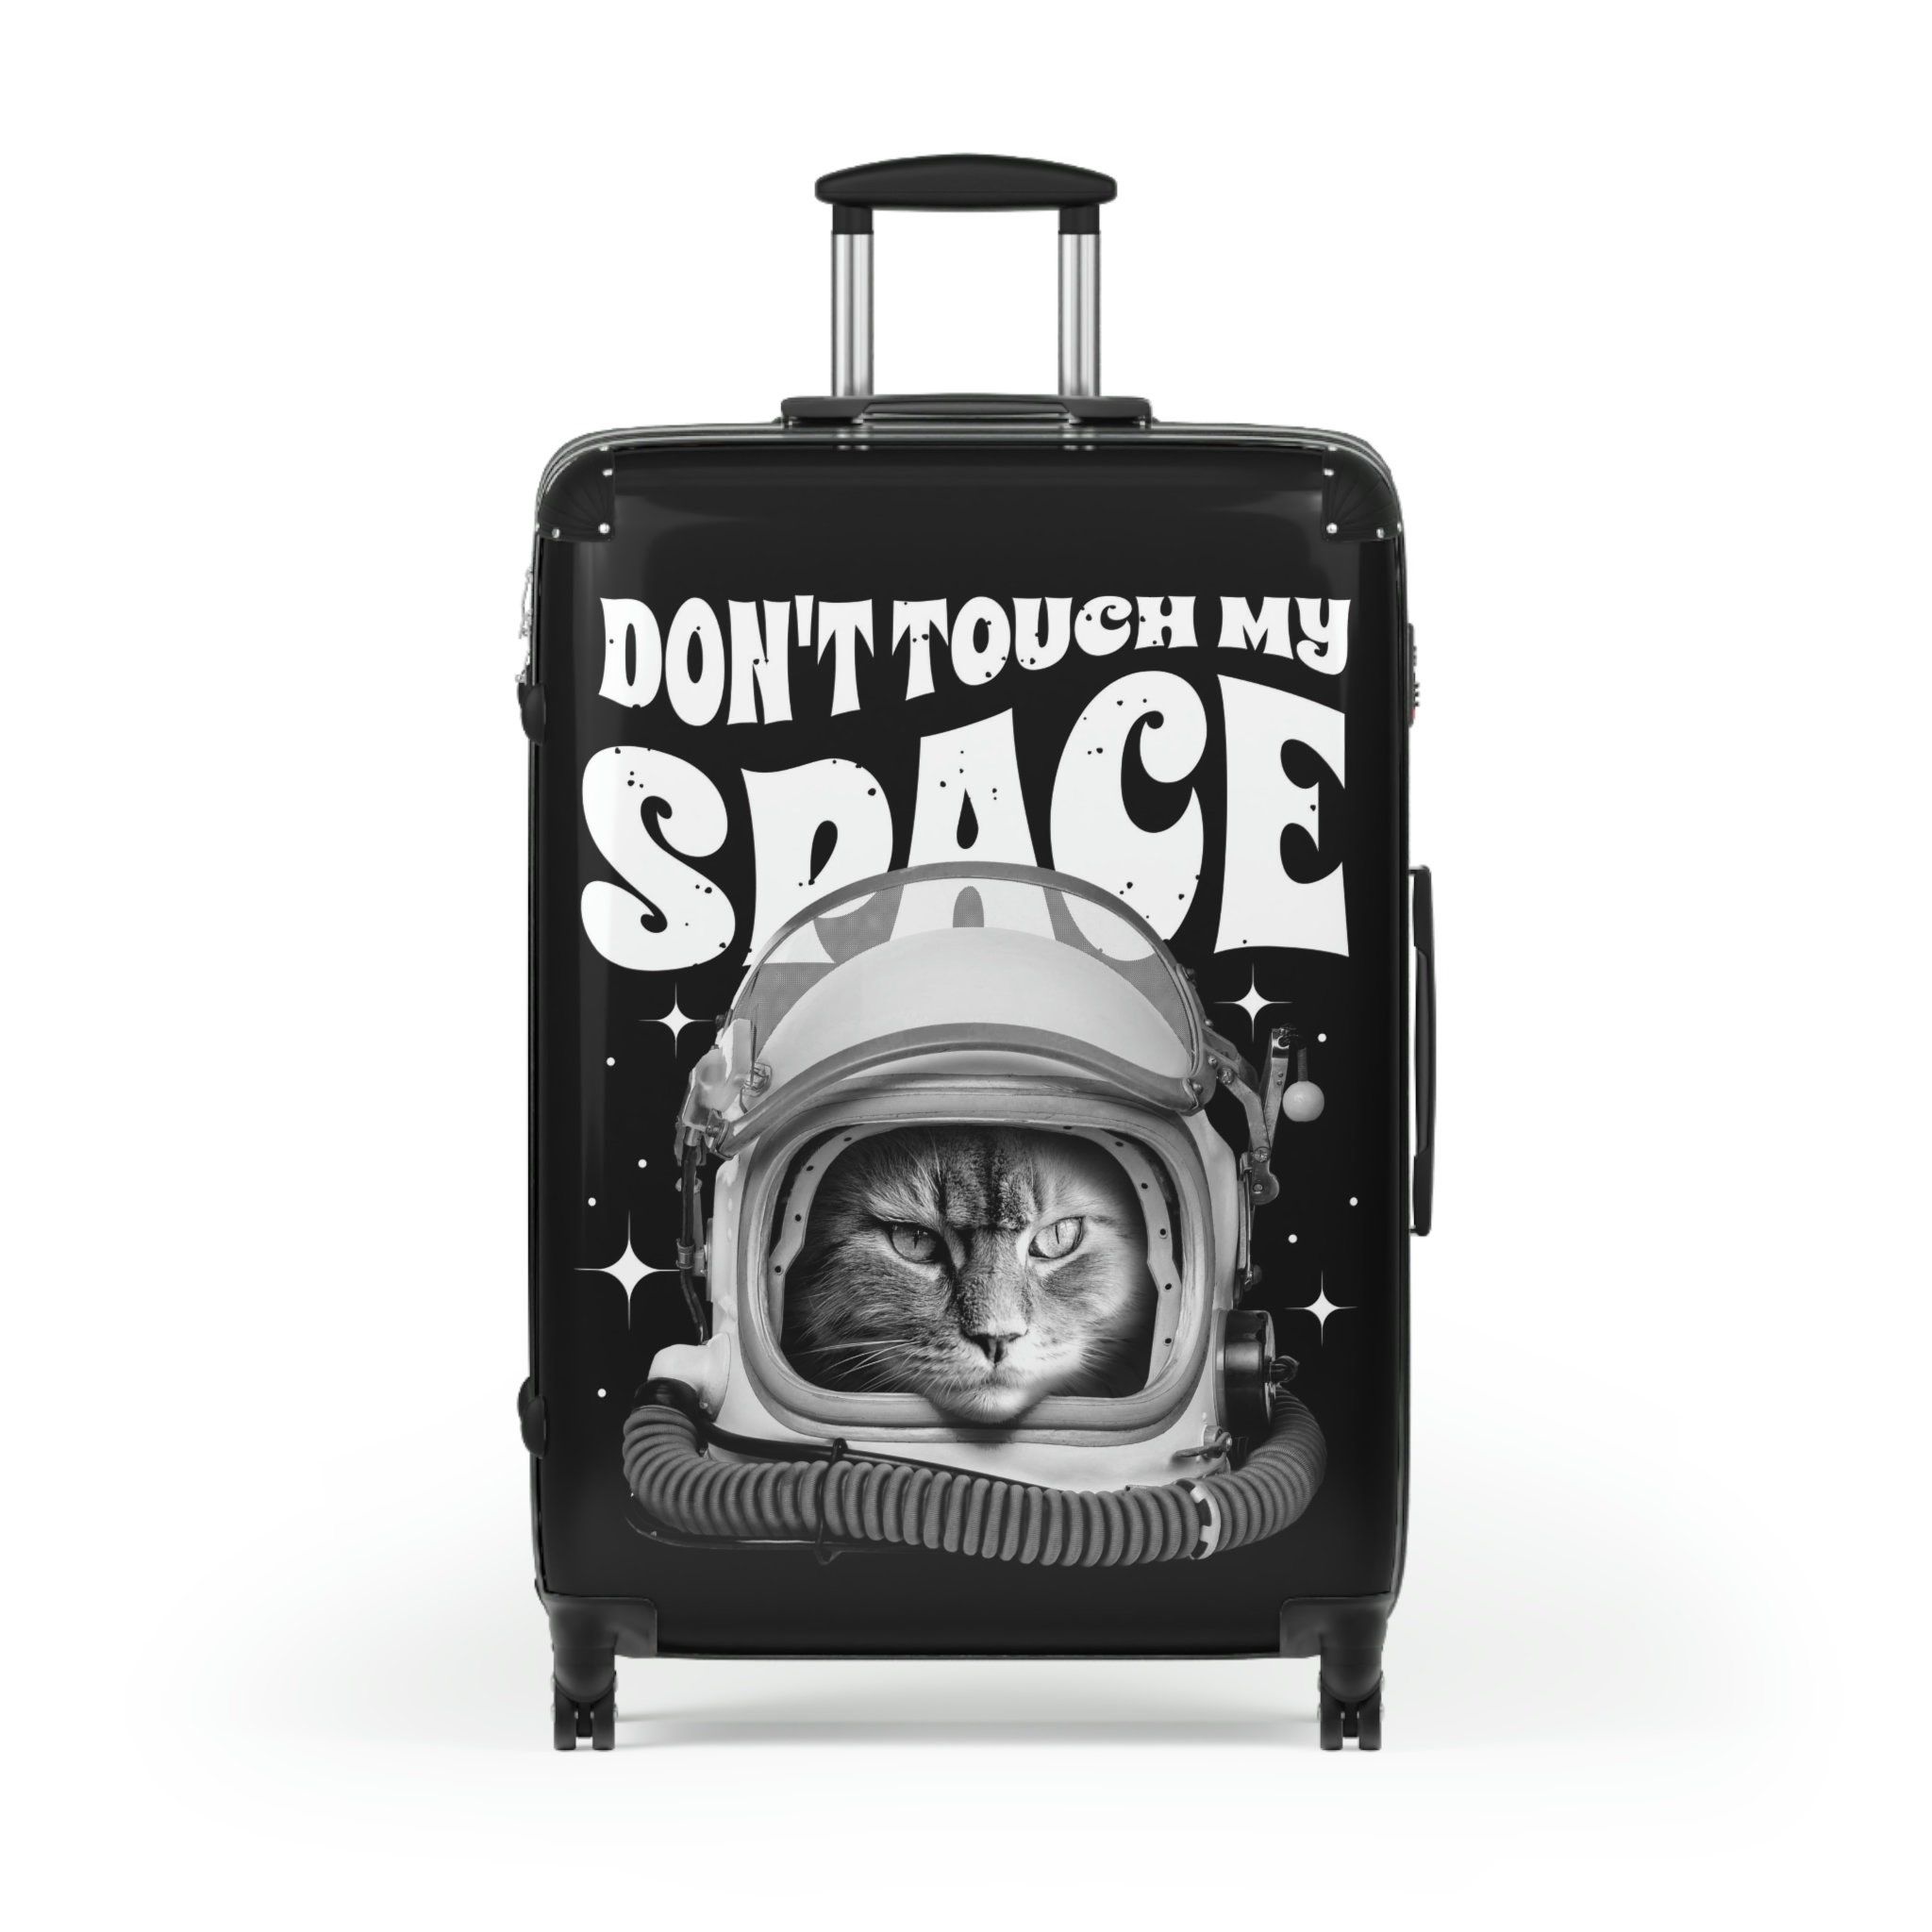 Space Cat Suitcase, Outer Space Cat Design Luggage, Hard Shell Travel Essential Case, Carry on Cabin Suitcase